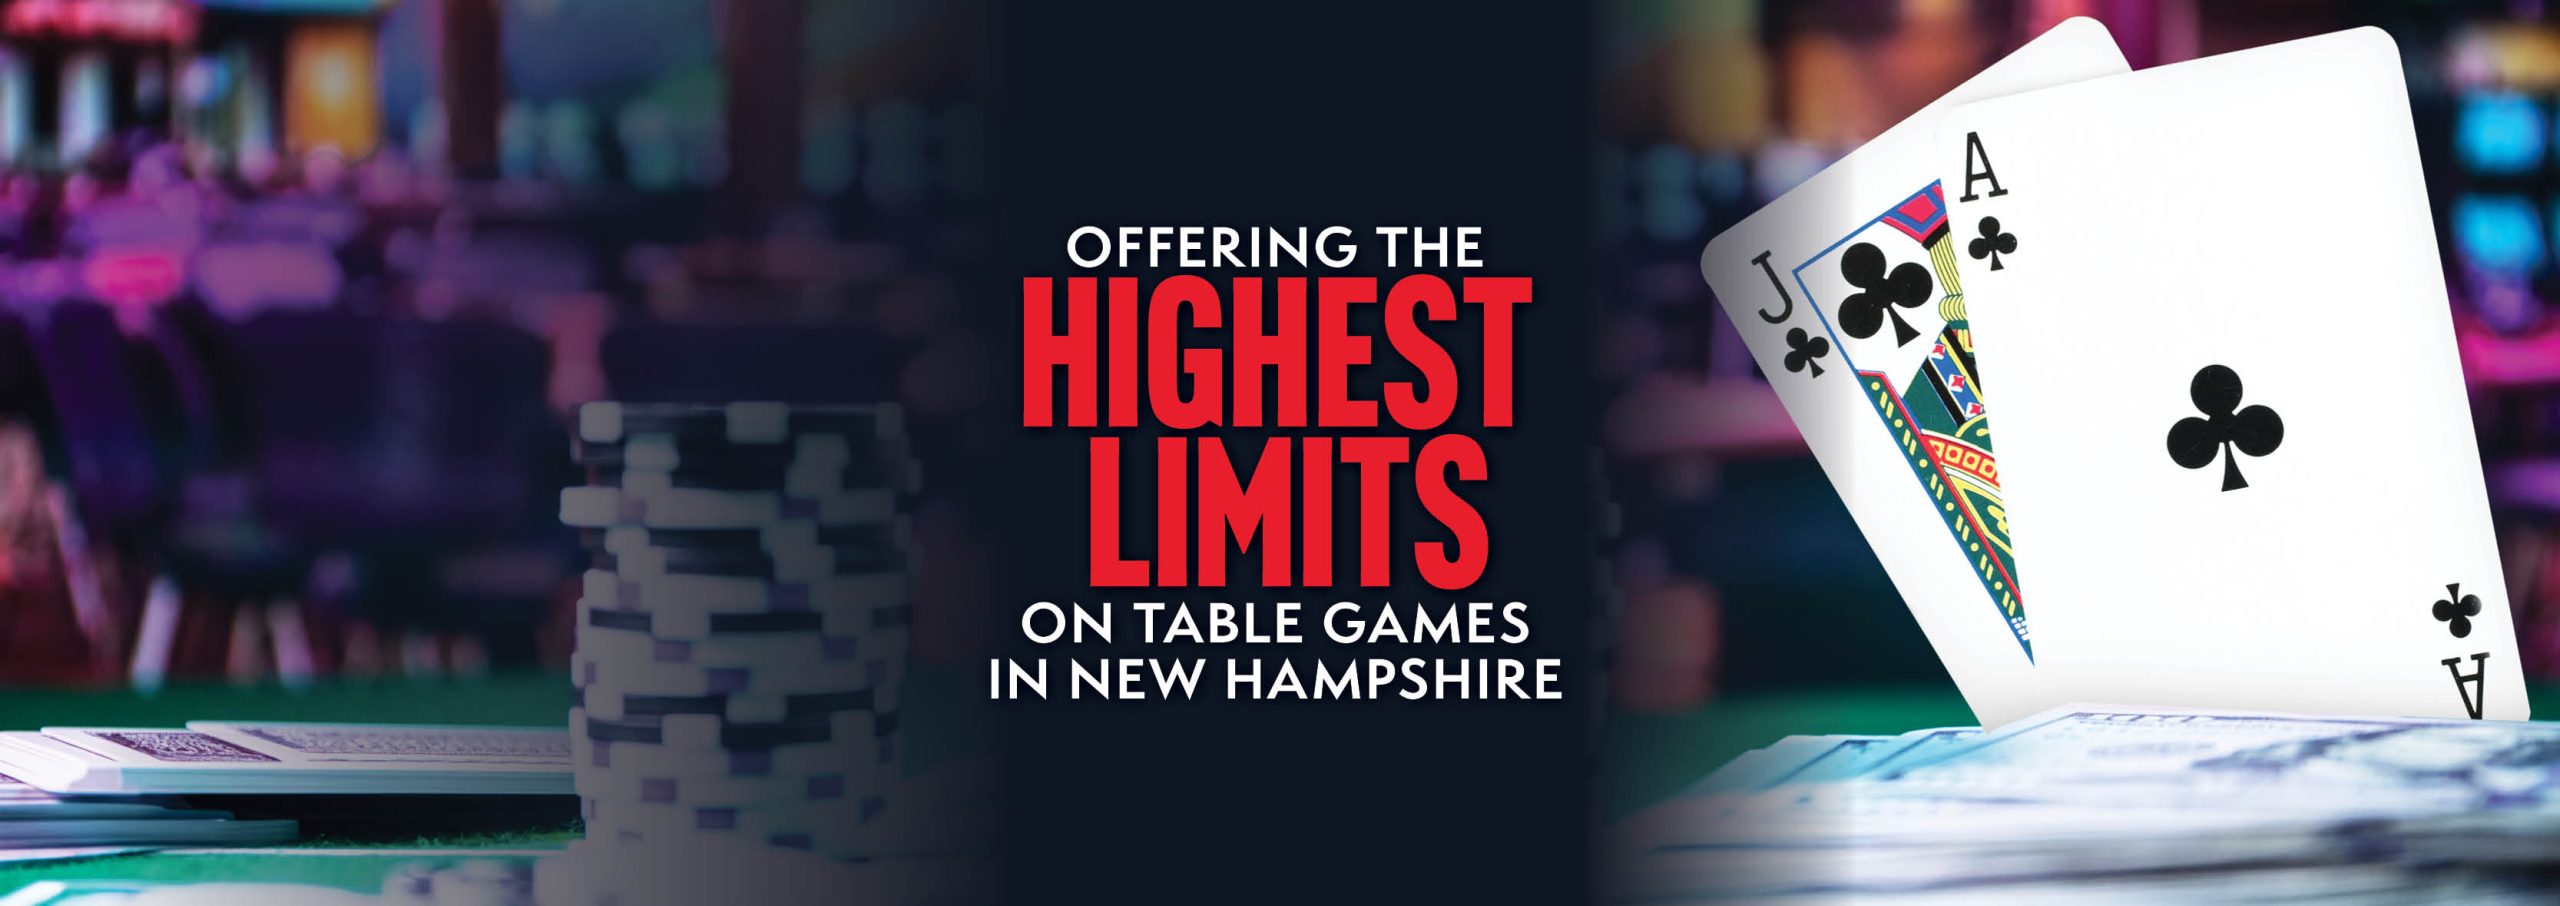 Offering Highest Limits in New Hampshire